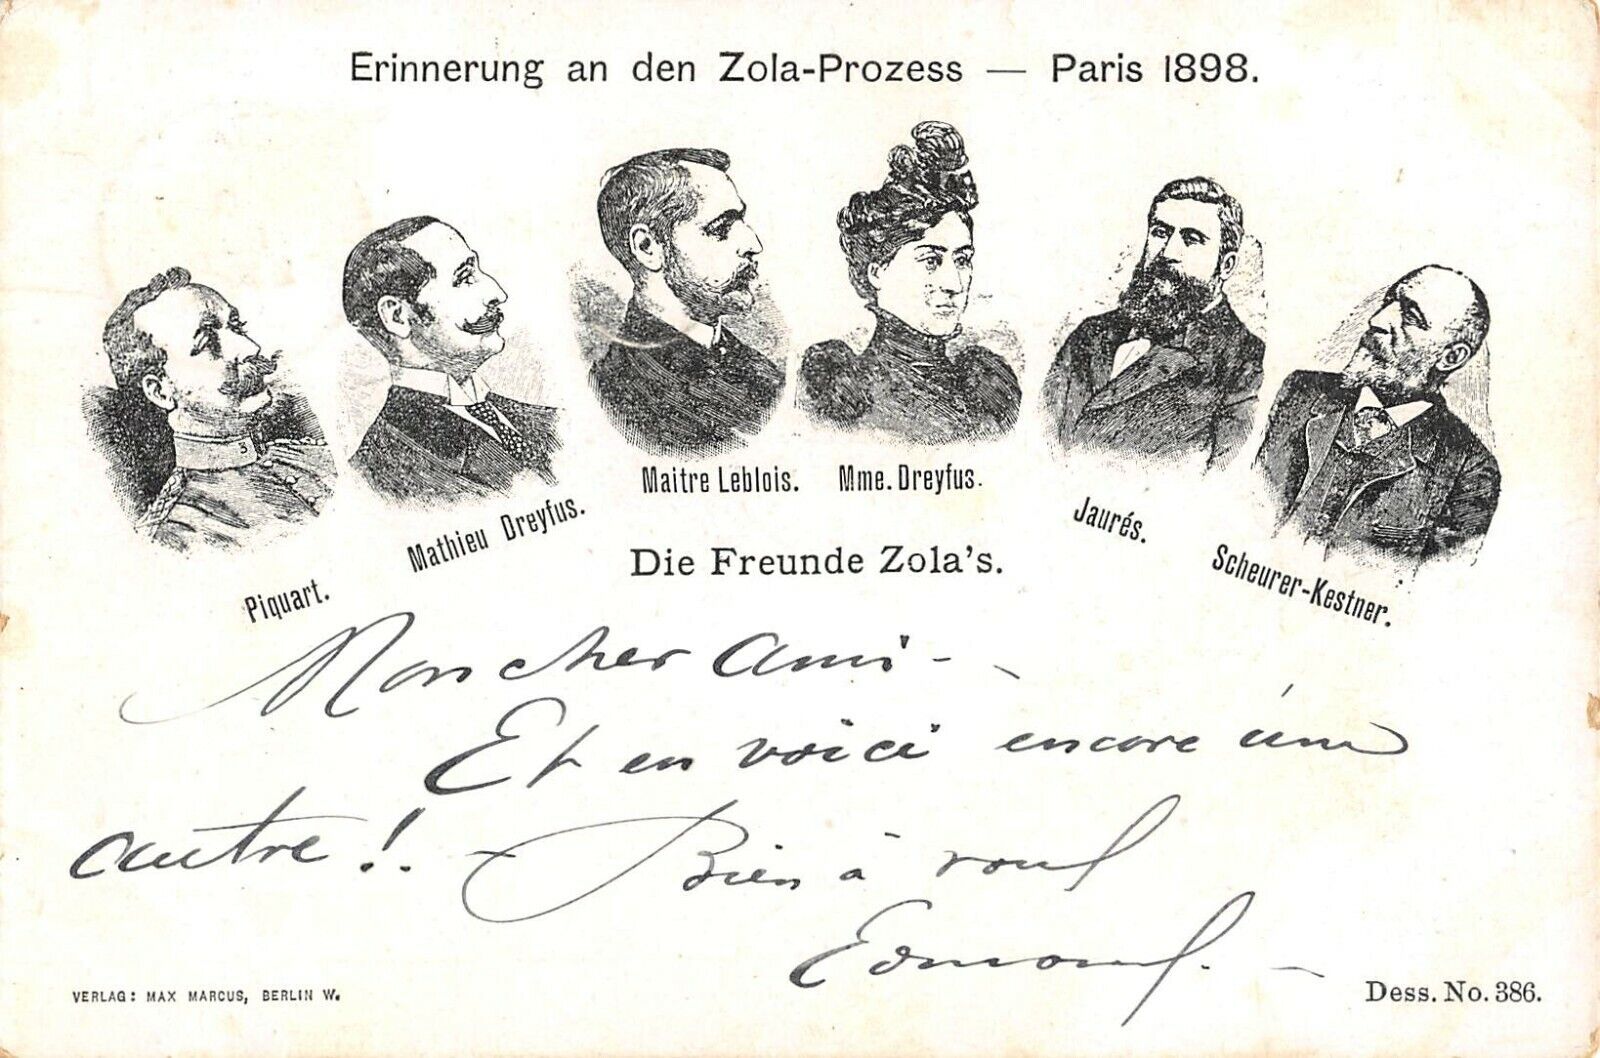 CPA THEME JUSTICE ZOLA DREYFUS PARIS 1898 MEMORY OF THE ZOLA PROCESS